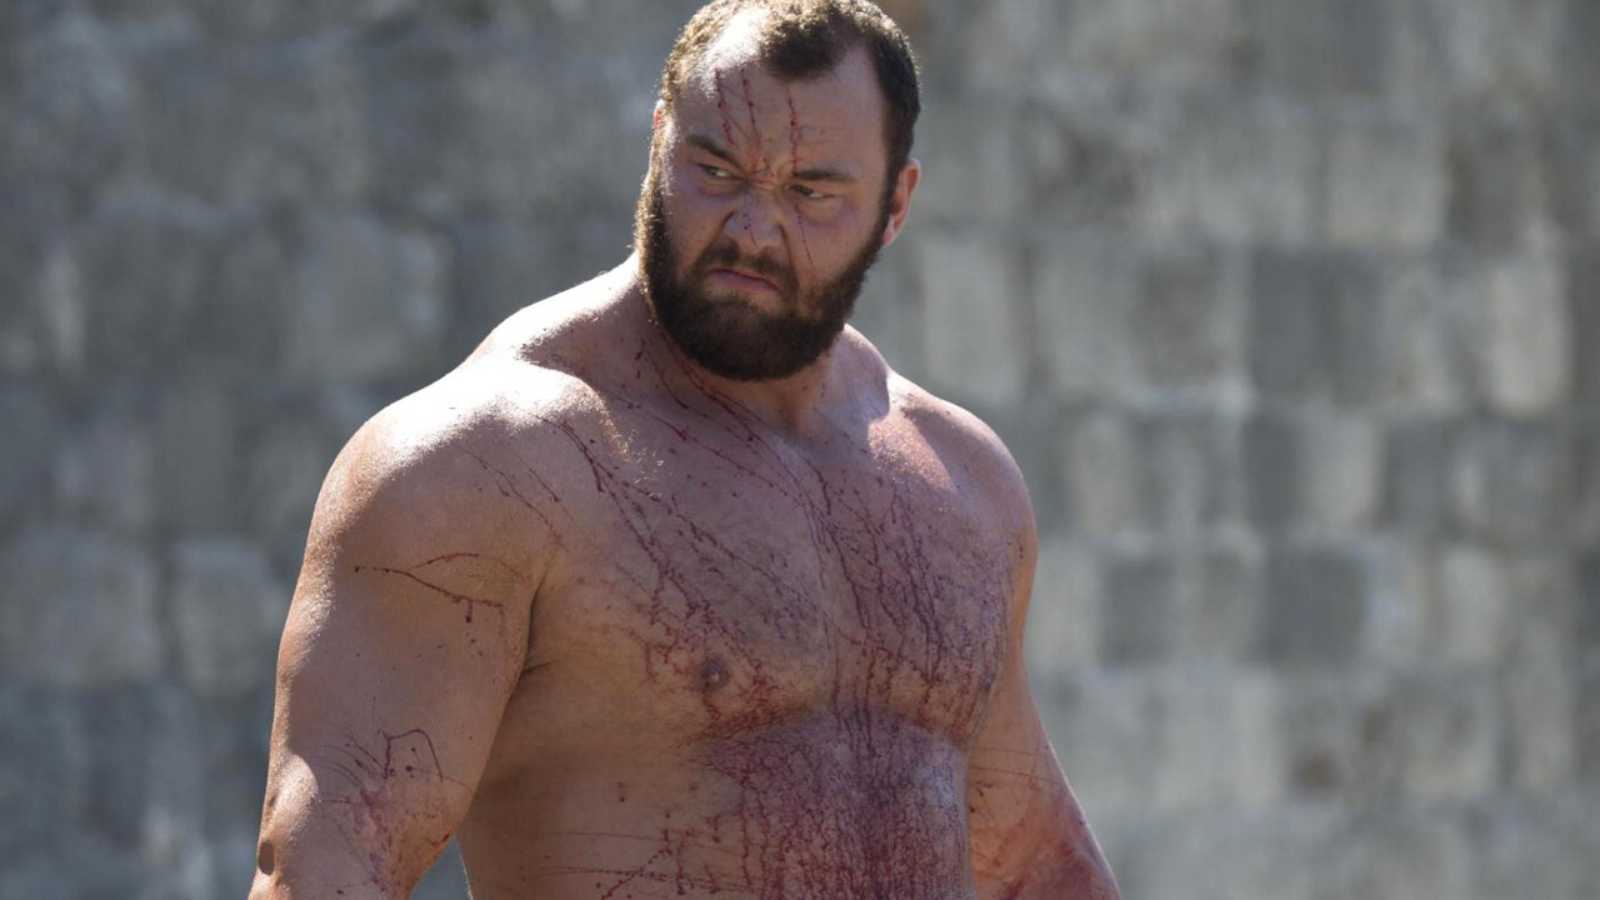 The Mountain in Game of Thrones